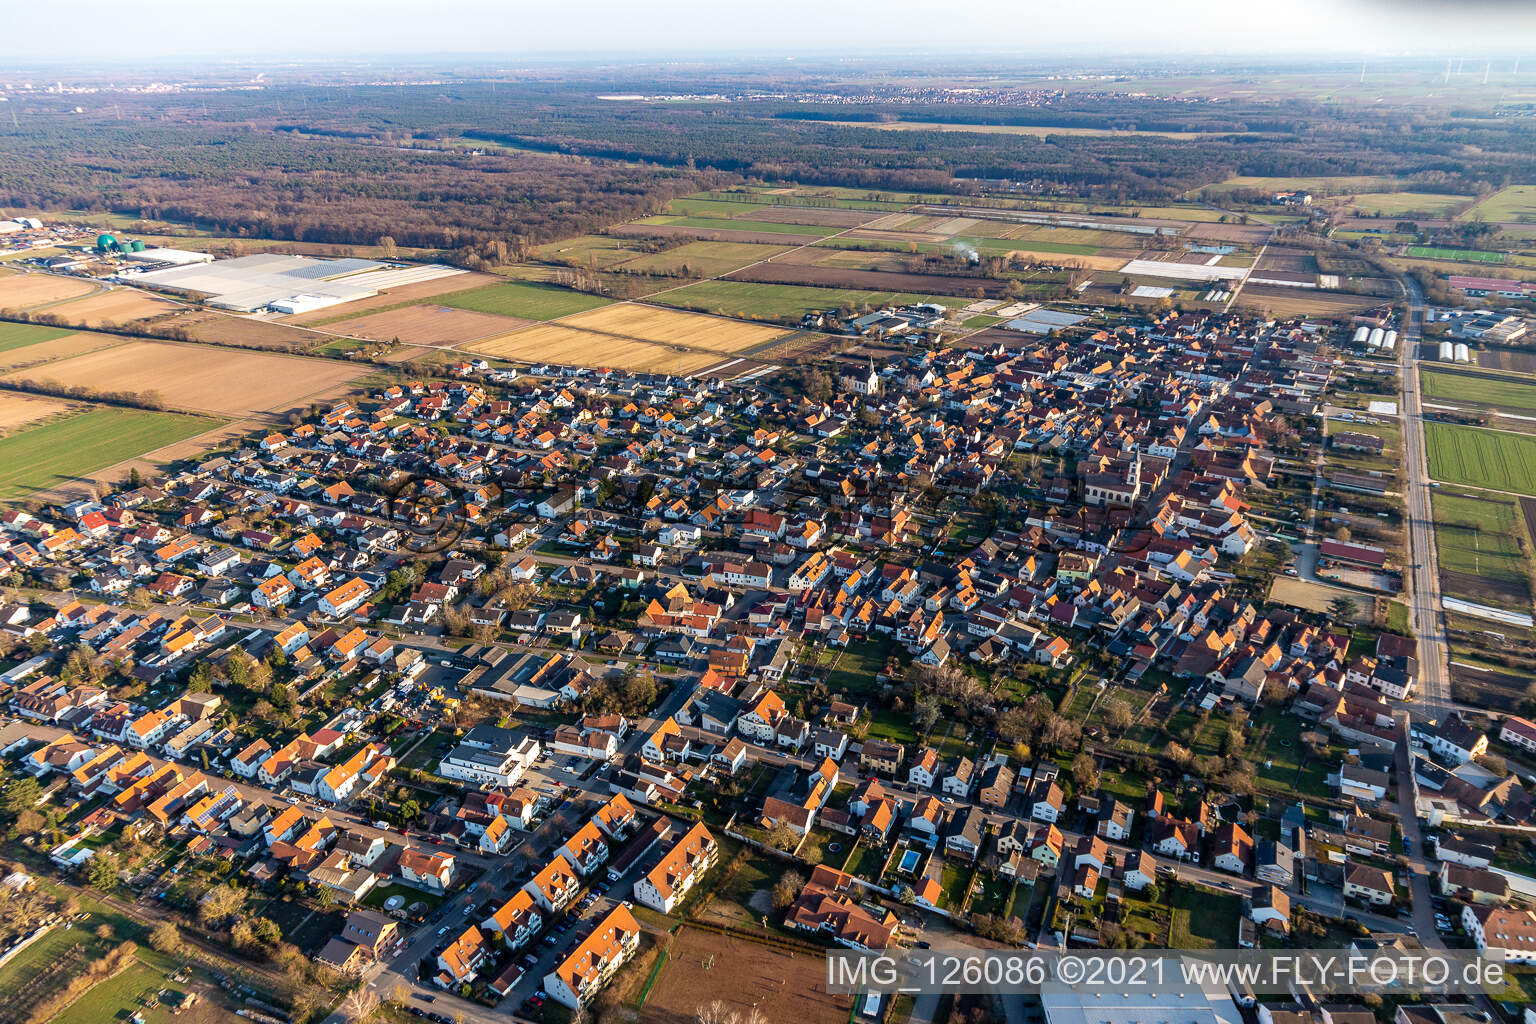 Aerial view of Village view on the edge of agricultural fields and land in Zeiskam in the state Rhineland-Palatinate, Germany